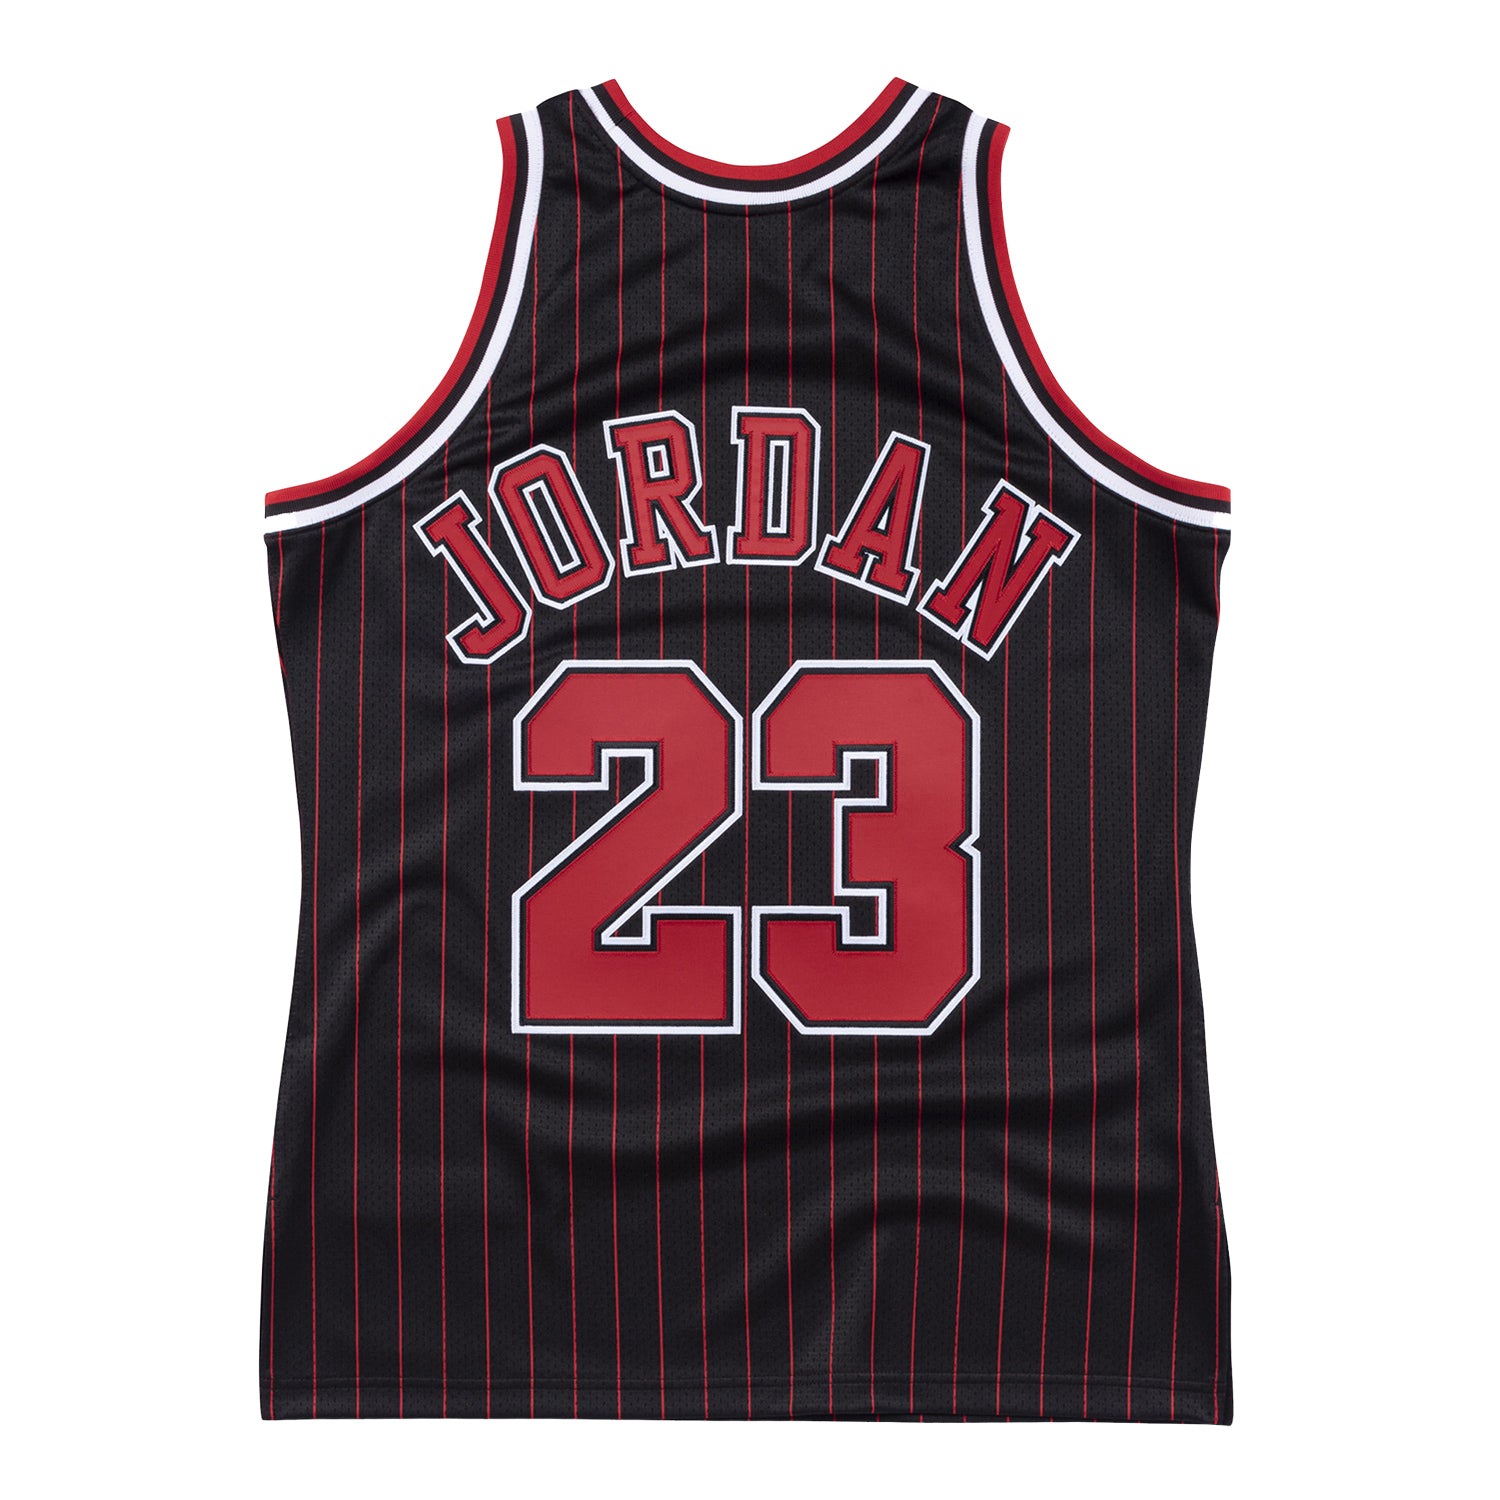 Authentic Dennis Rodman Chicago Bulls 1995-96 Jersey - Shop Mitchell & Ness Authentic  Jerseys and Replicas Mitchell & Ness Nostalgia Co.